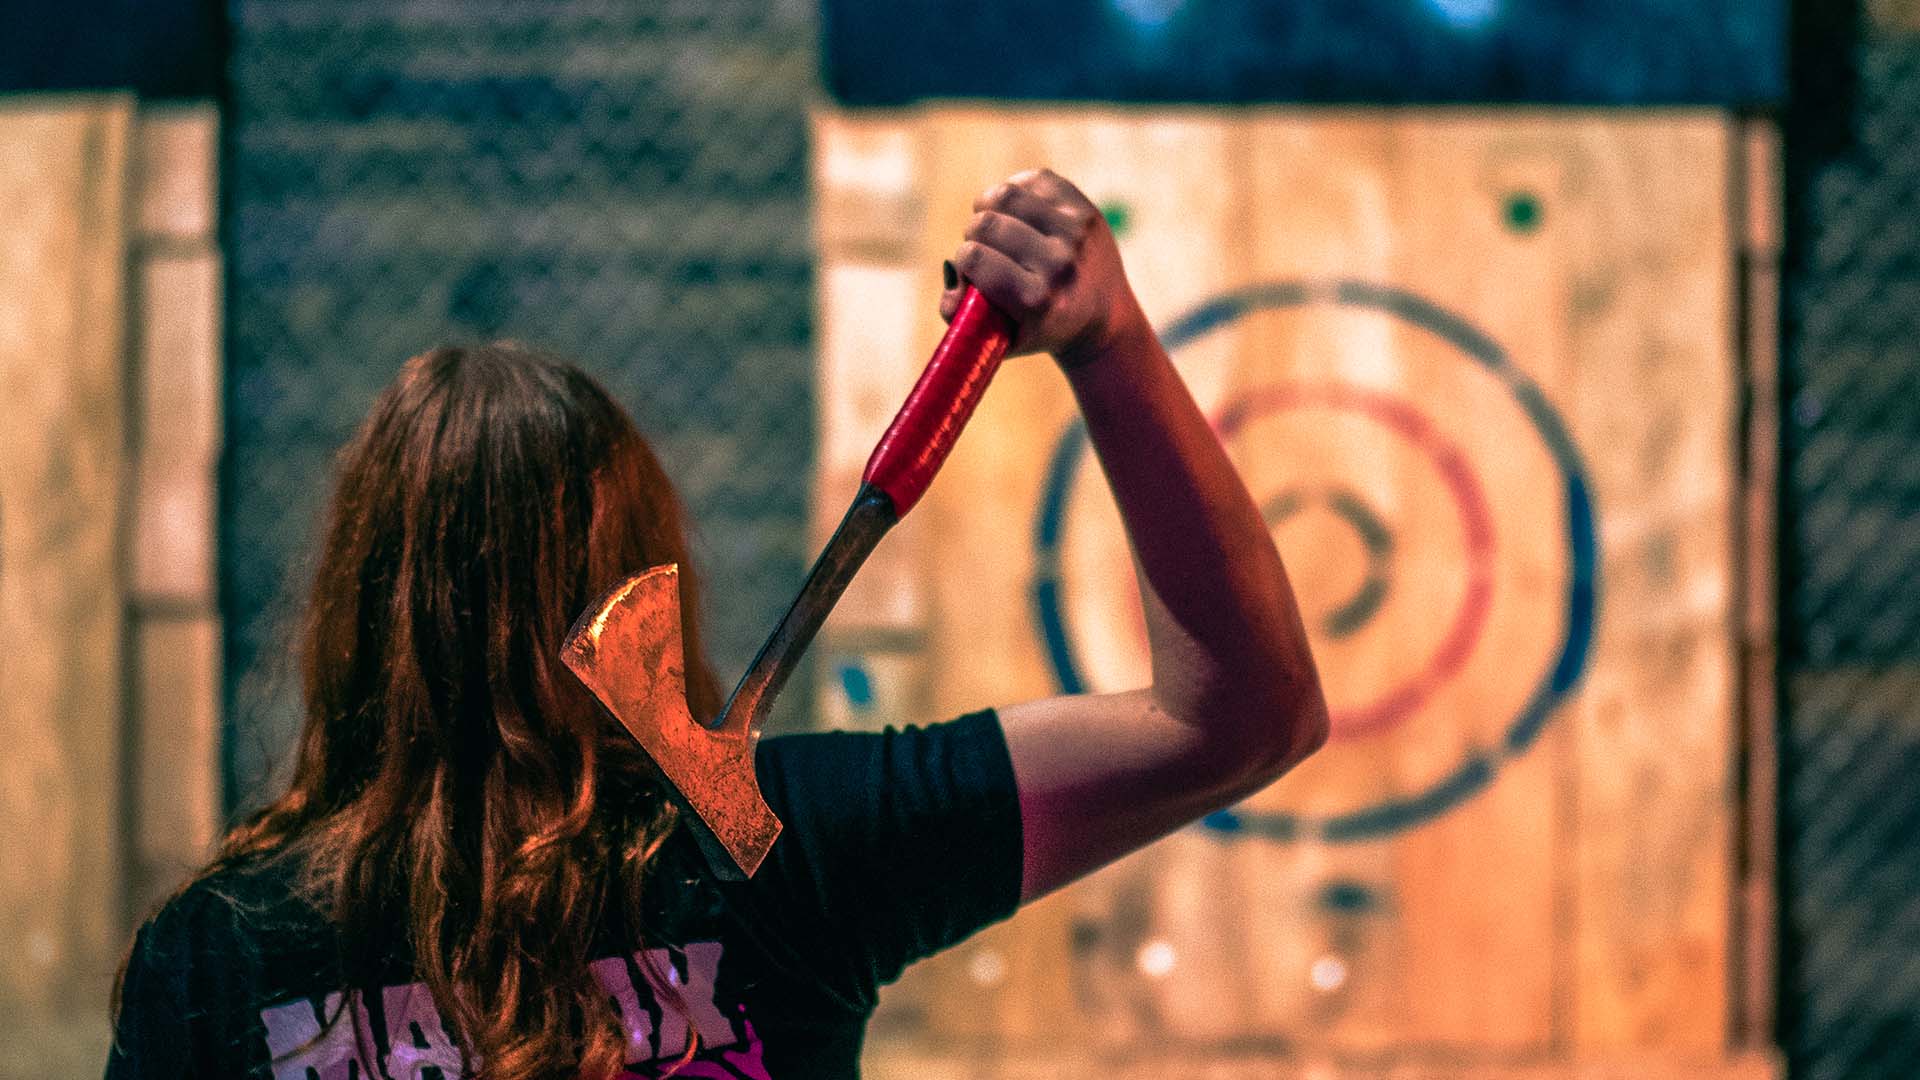 Coming Soon: Maniax Is Opening a Second Brisbane Viking-Themed Axe-Throwing Joint with a Bar and Restaurant